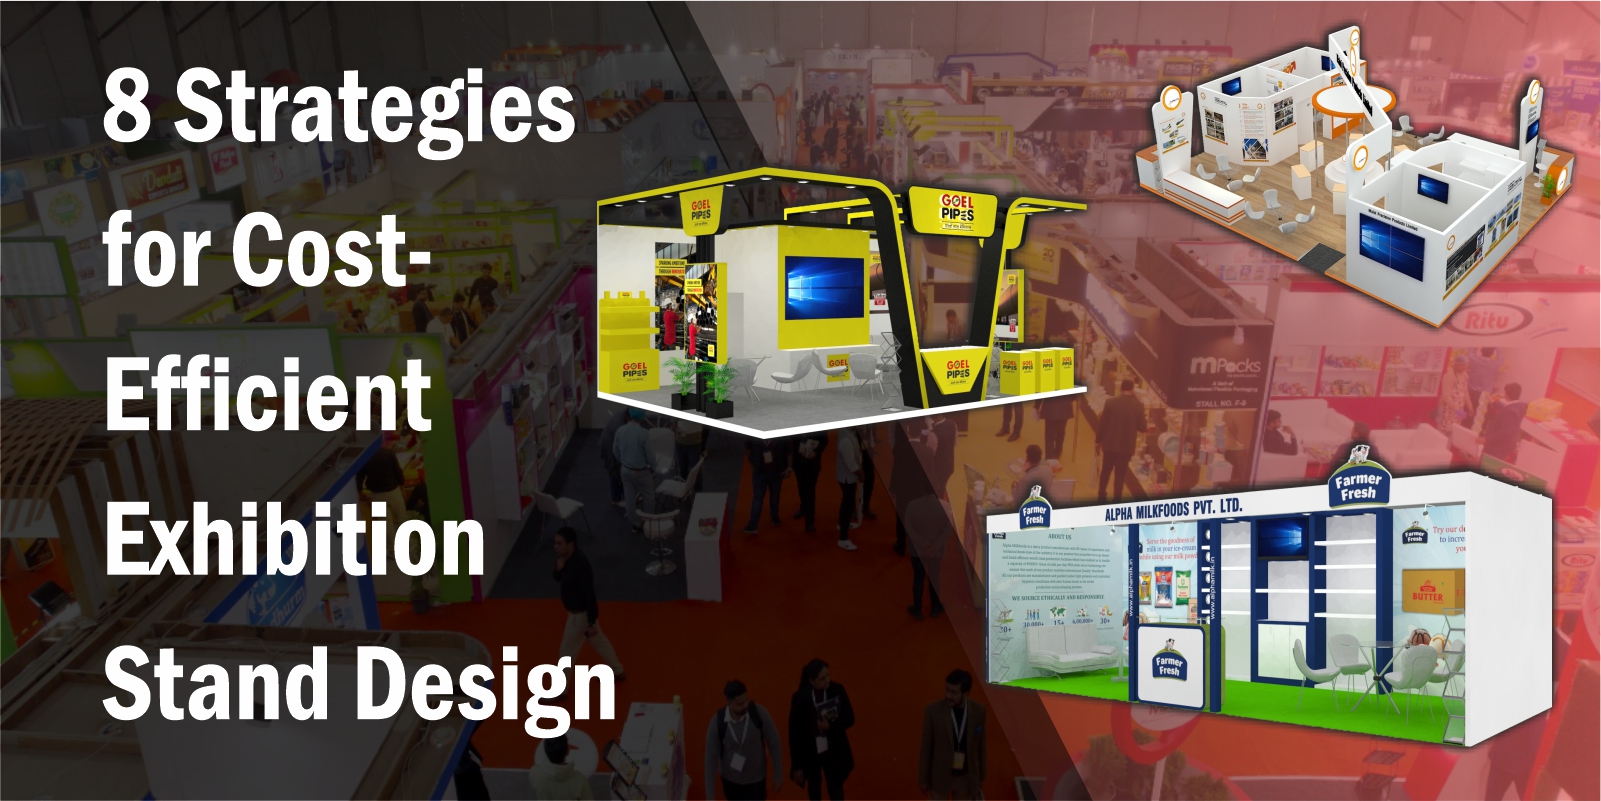 8 Strategies for Cost-Efficient Exhibition Stand Design